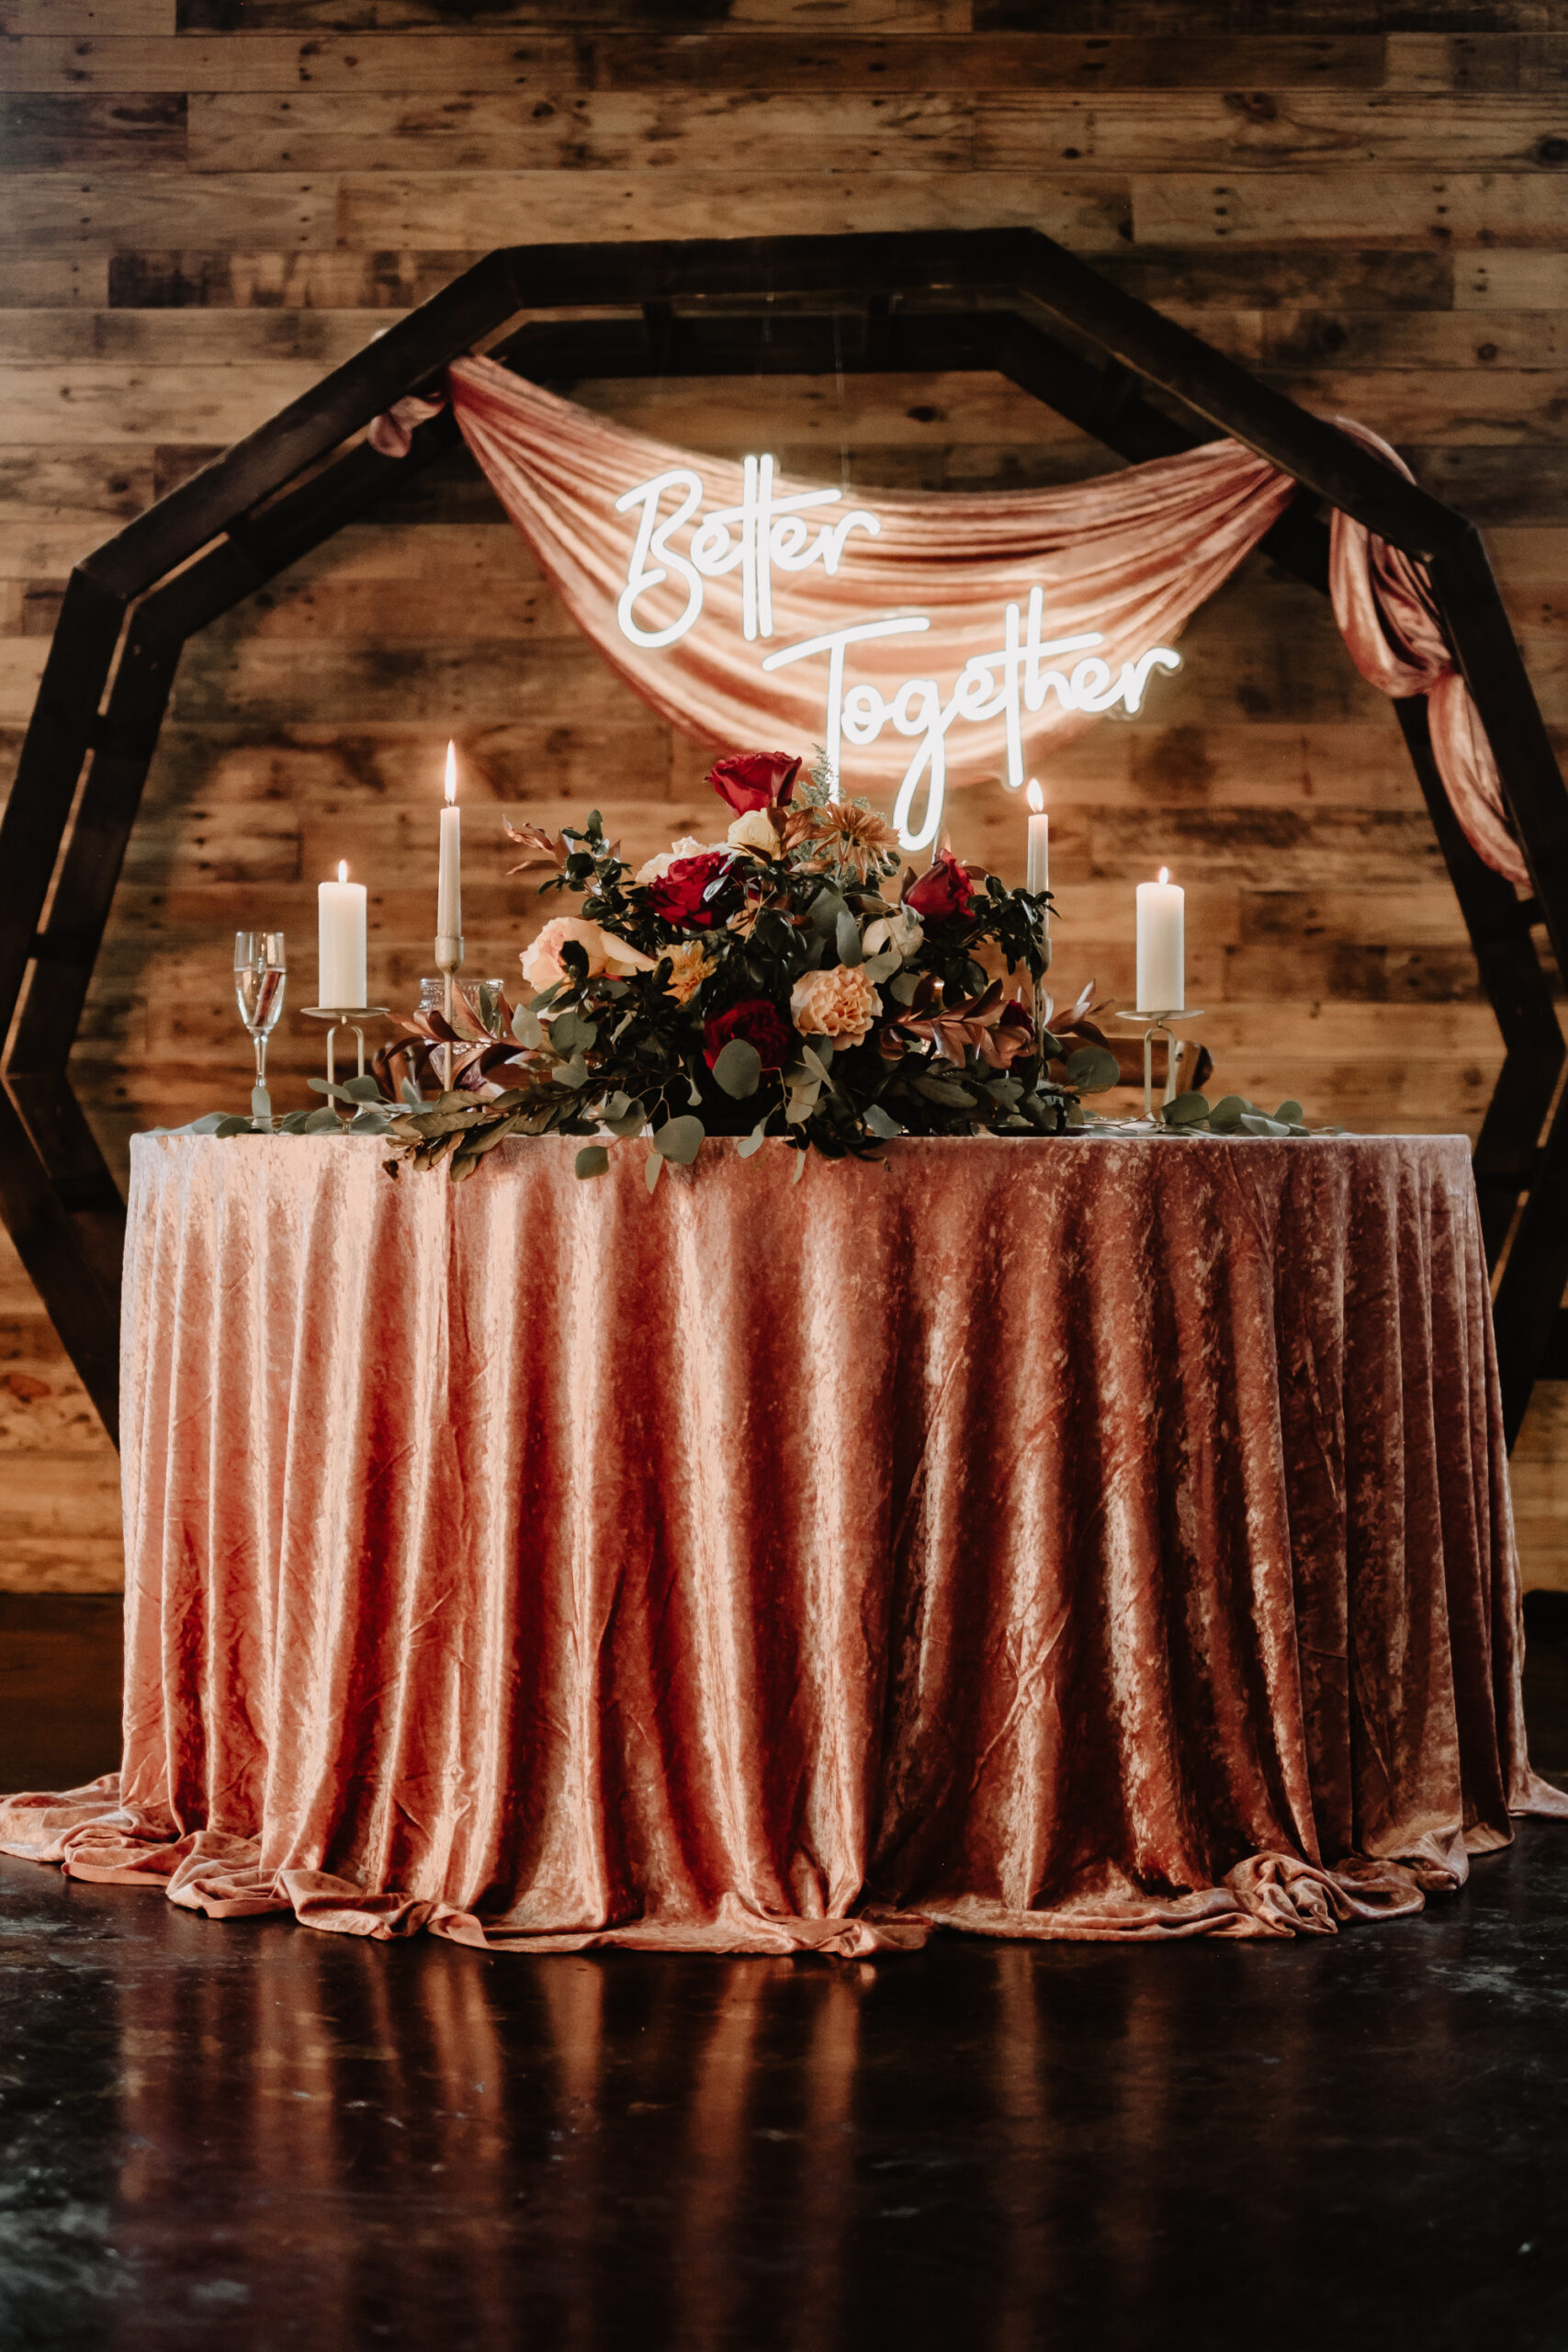 Sweetheart Head Wedding Reception Table With Dusty Rose Velvet Linens | Fall Inspired Maroon, Burgundy Cream, and Greenery Table Floral Arrangement, Neon Sign and Geometric Arch | Moody Fall Wedding Reception Ideas